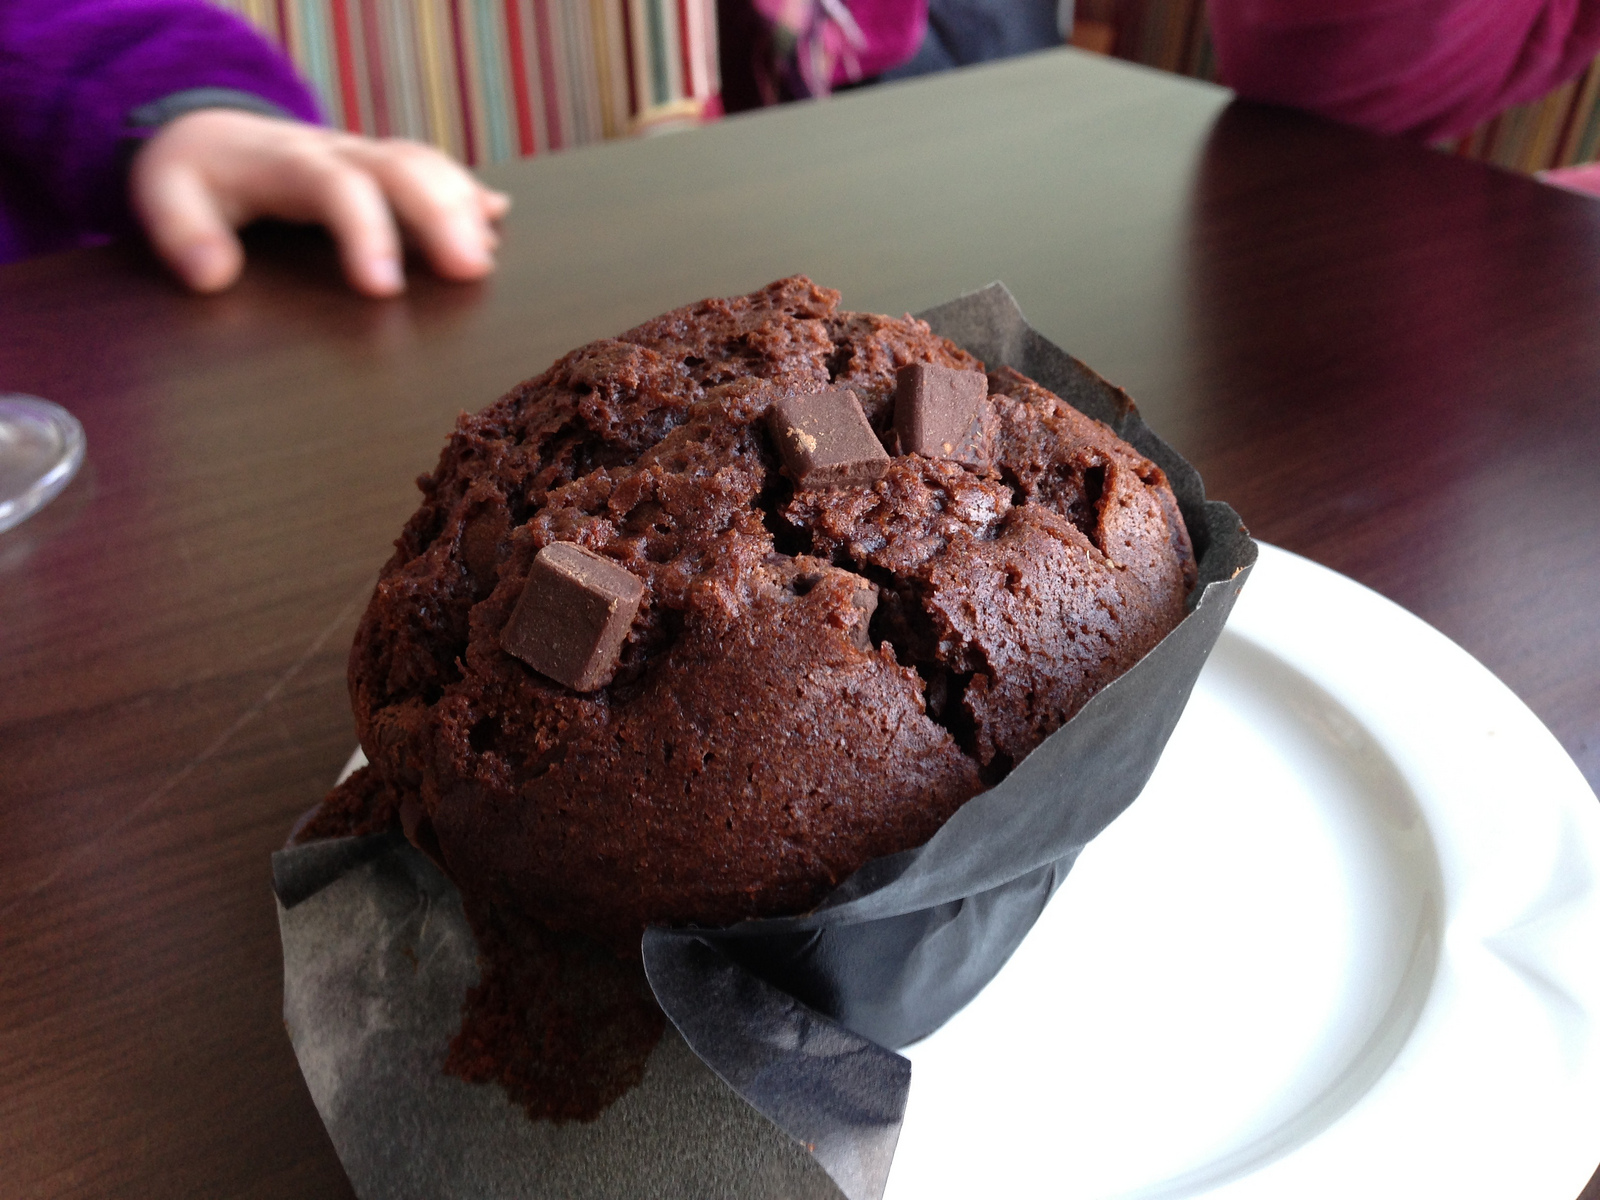  ​The giant chocolate chip muffin. In a very cute move, I think Dan's daughter managed to eat as much of as she had smeared on her face and fingers! 